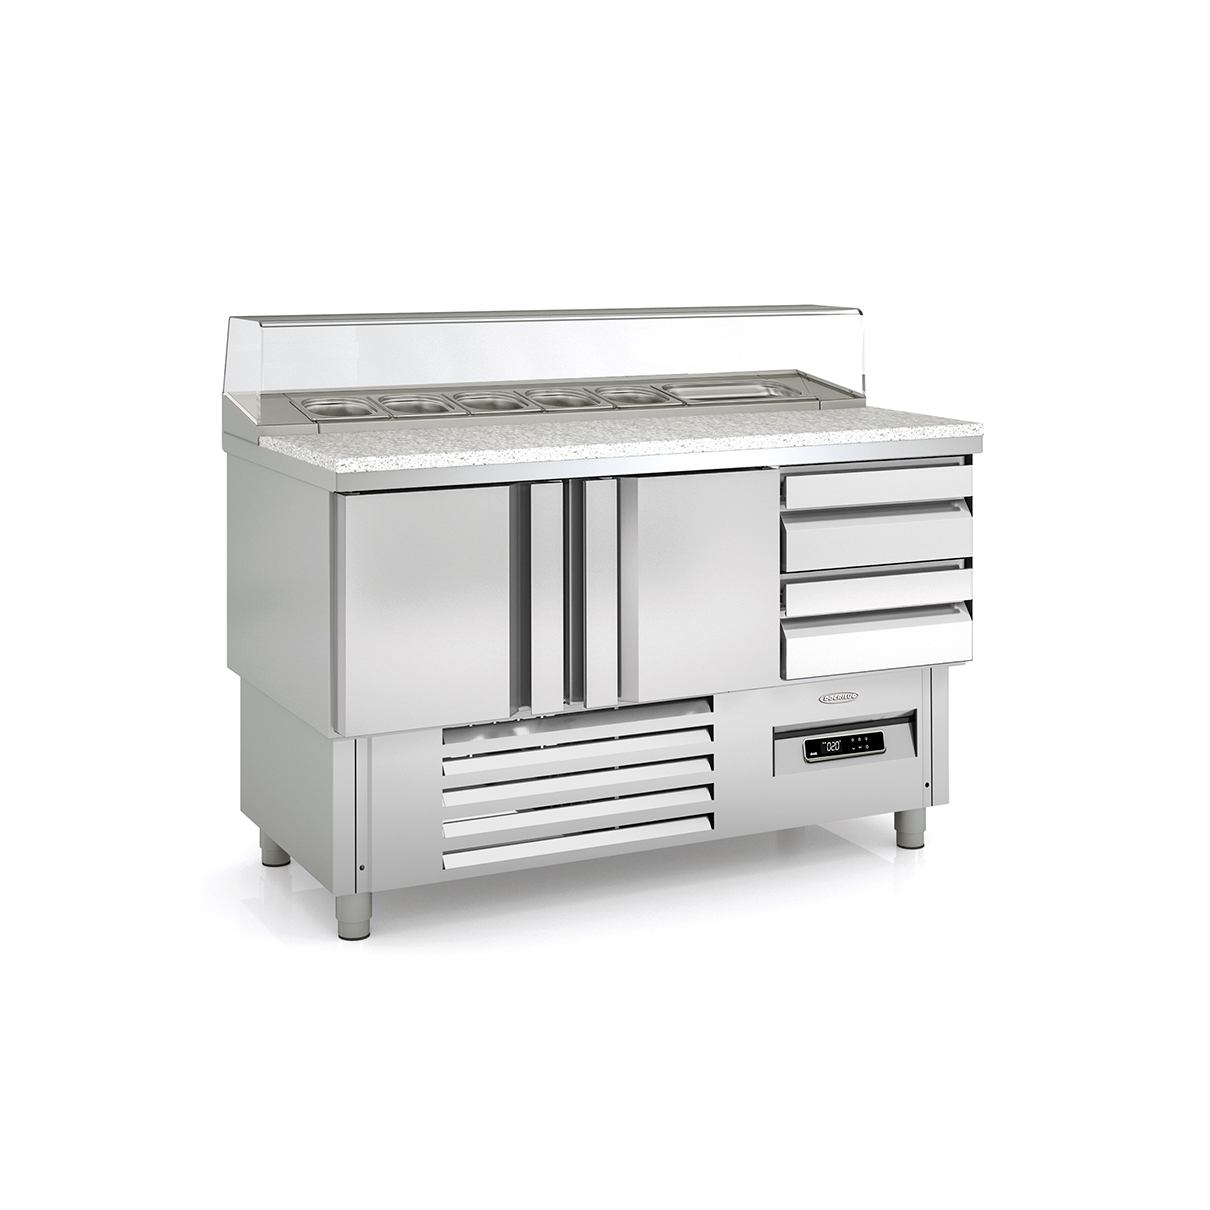 Gastronorm 1/1Refrigerated Table for Food Preparation MP-P